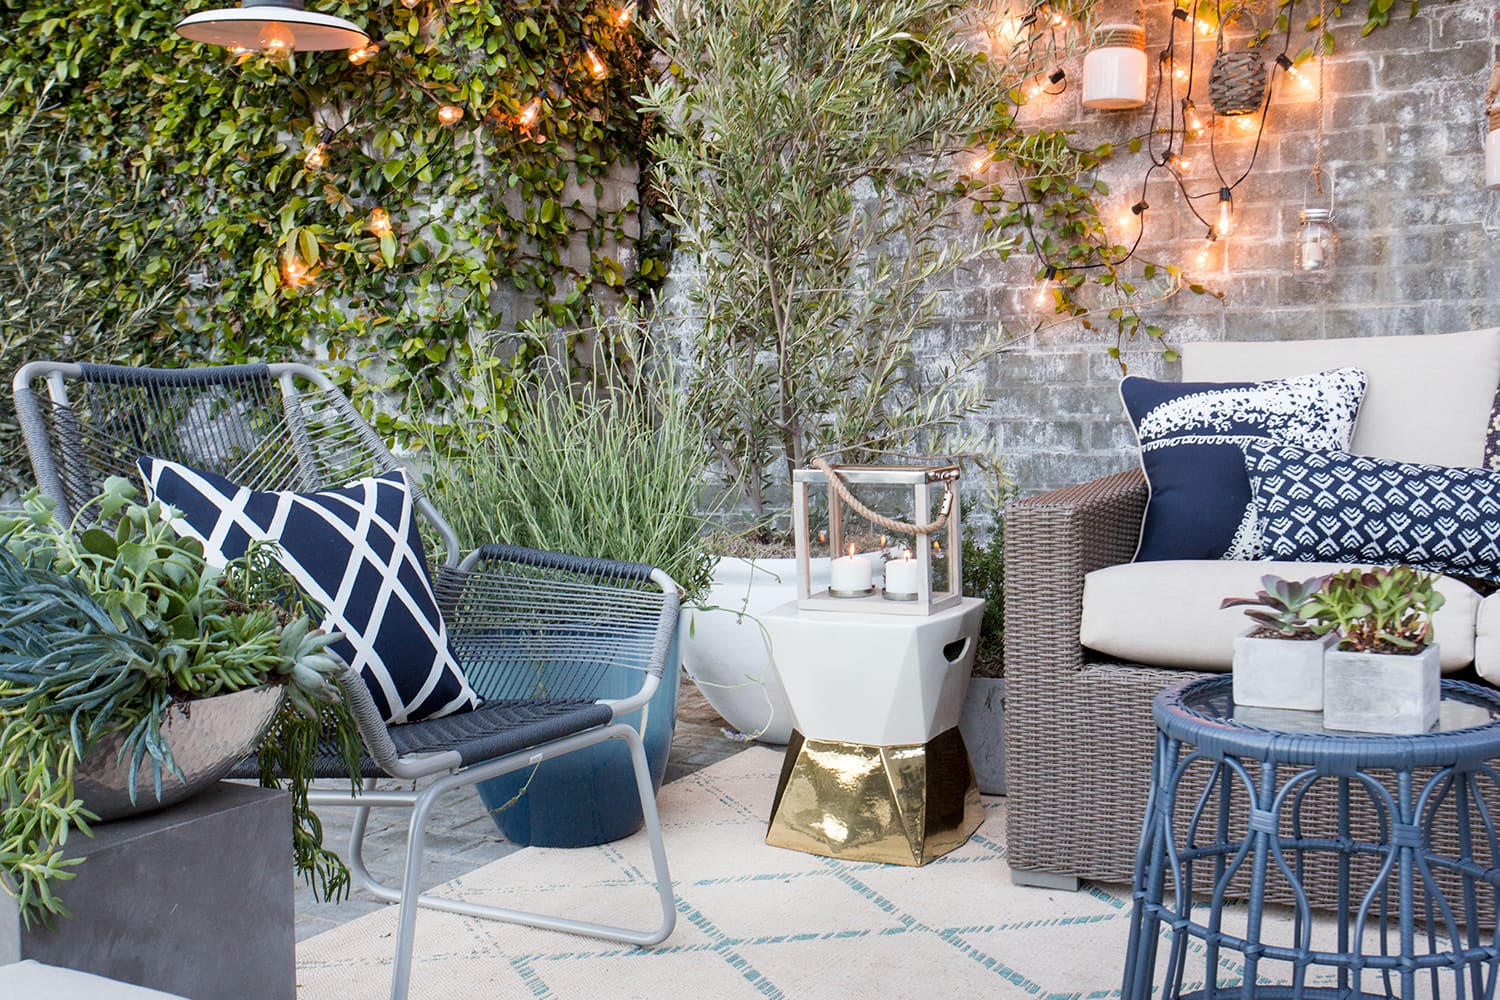 West Elm’s Outdoor Furniture Sale Is Full of Stylish Picks for Any Size Patio — See Our 10 Favorites